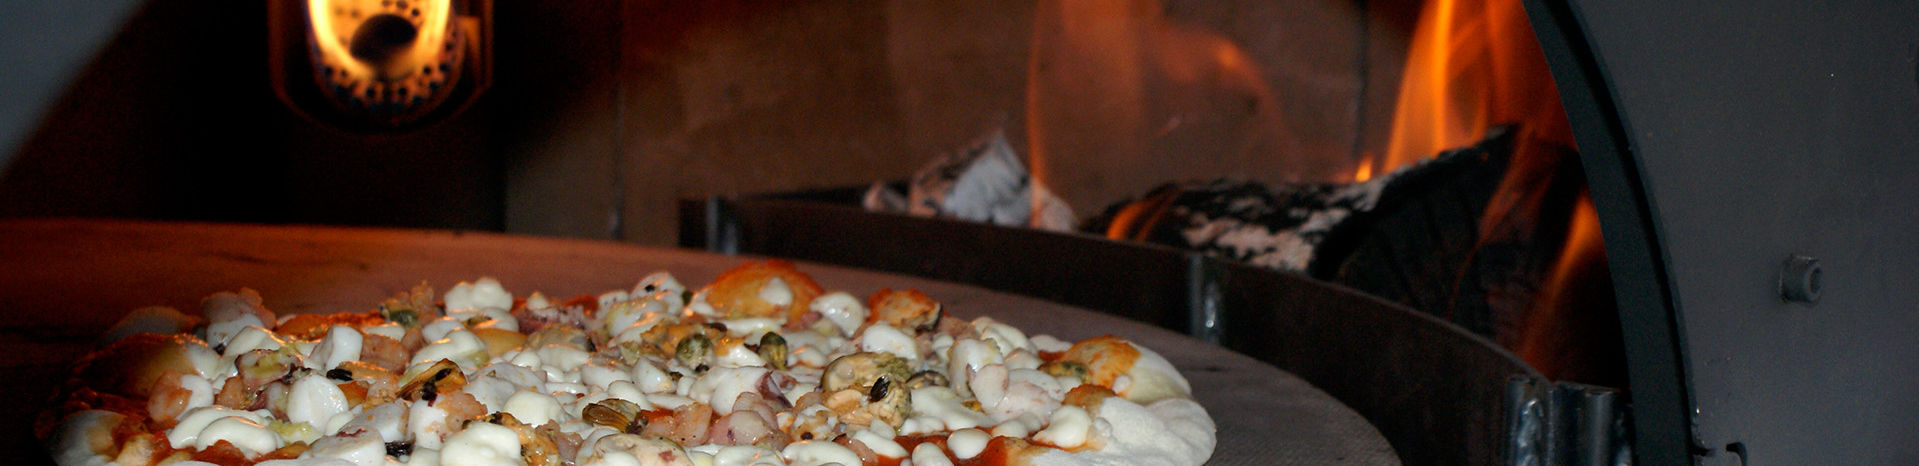 woodness-pizzapizza-oven